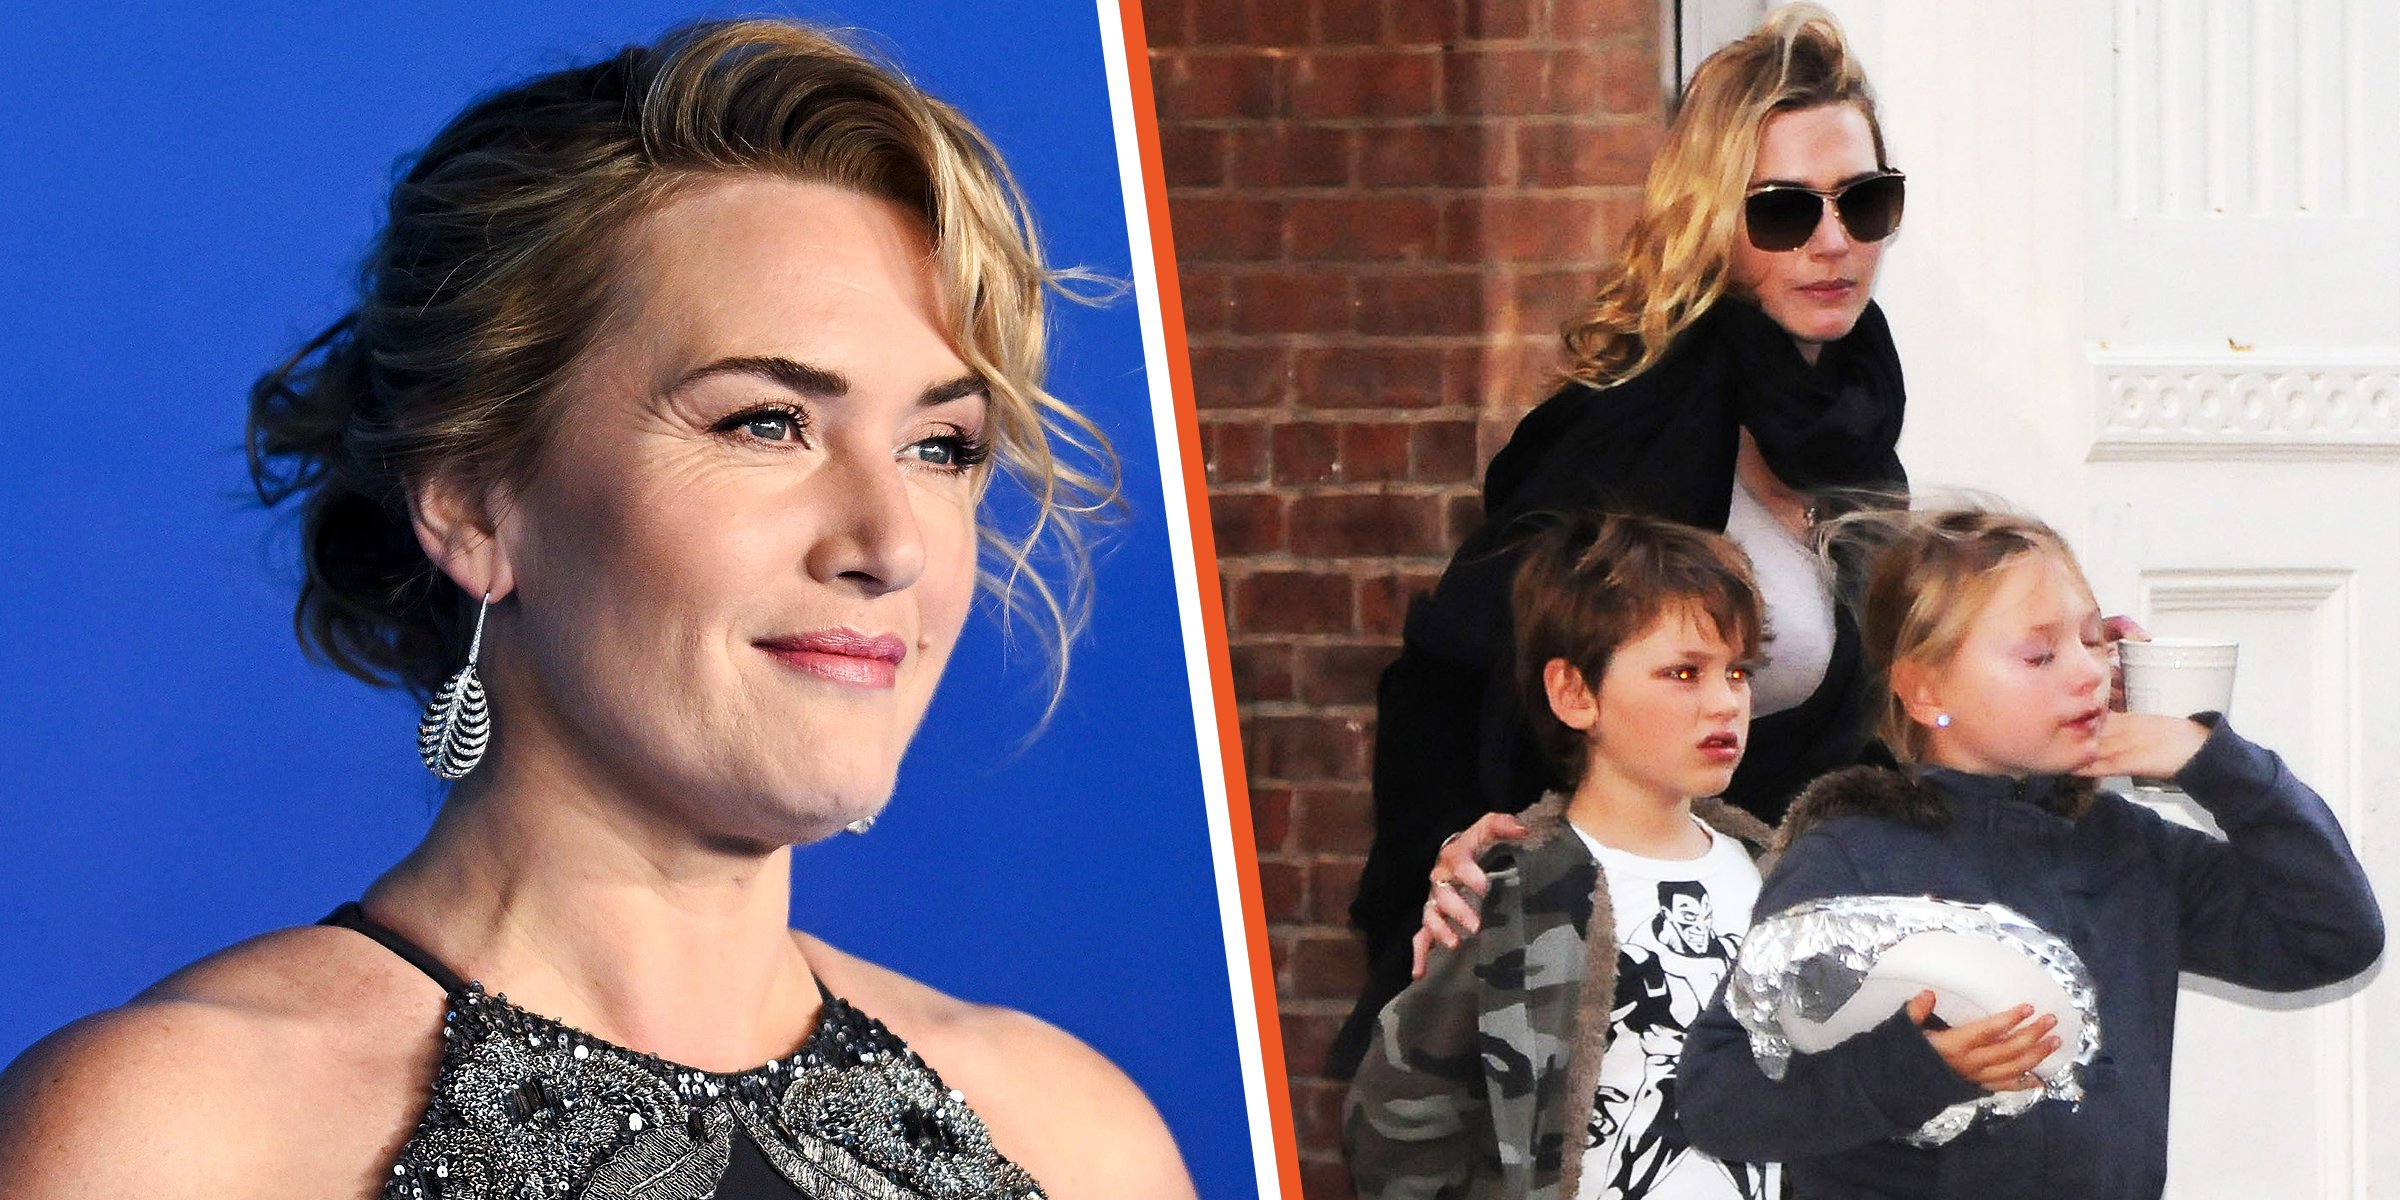 Joe Winslet Mendes Is Now a Teen & Makes Music - Kate Winslet's Son with Sam Mendes